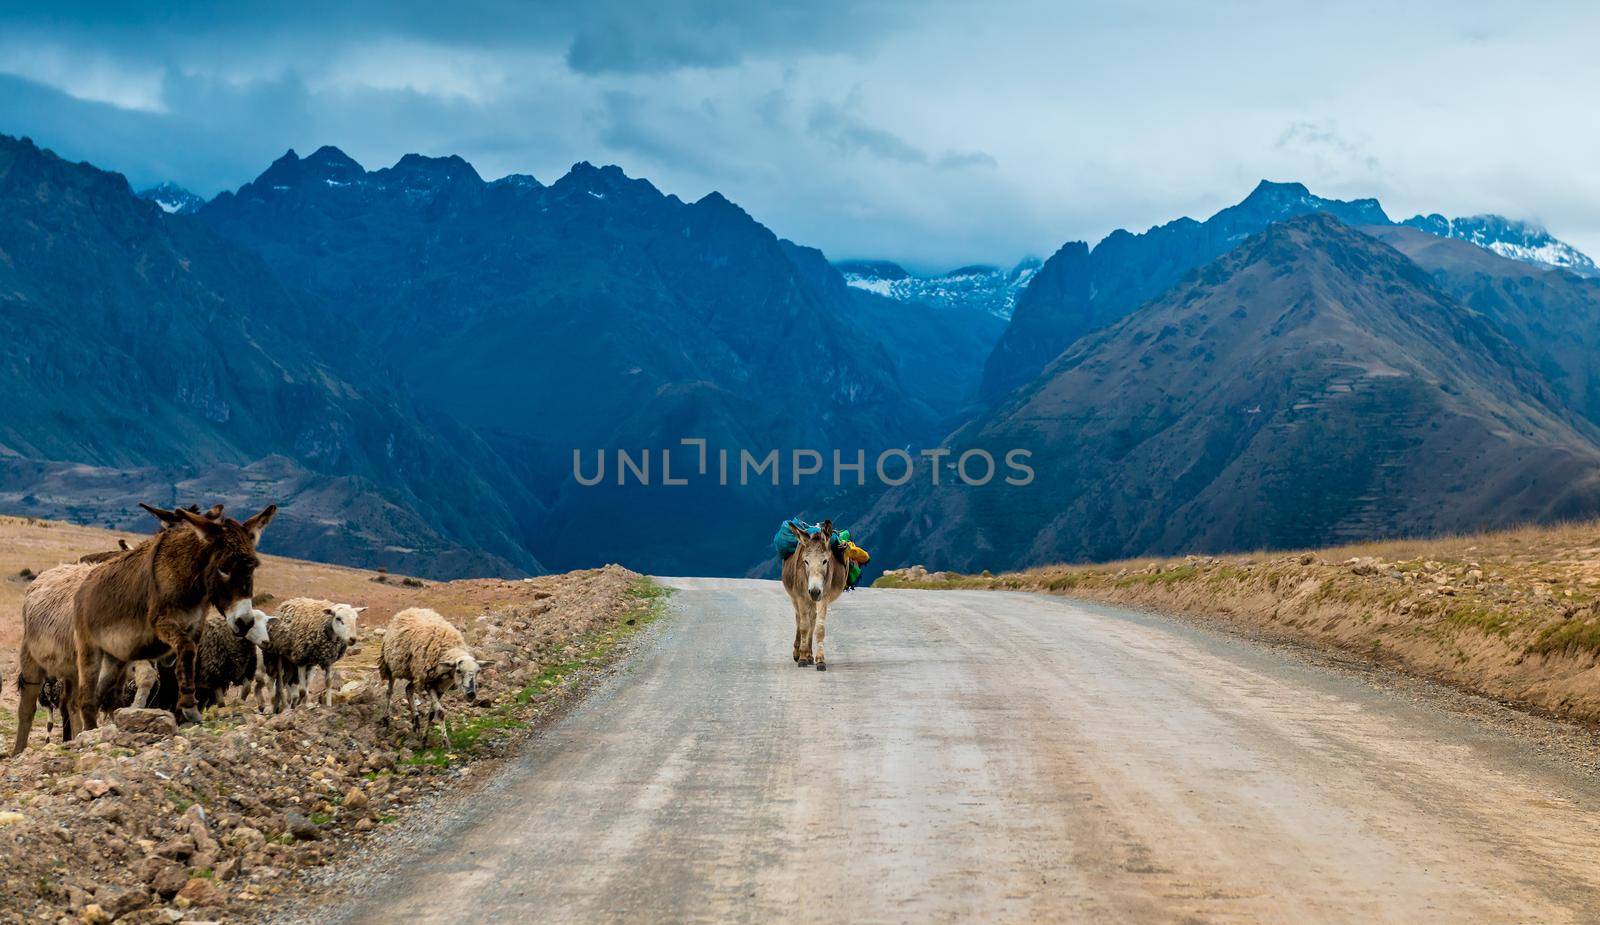 Animals on the mountain road, Bolivia by tan4ikk1